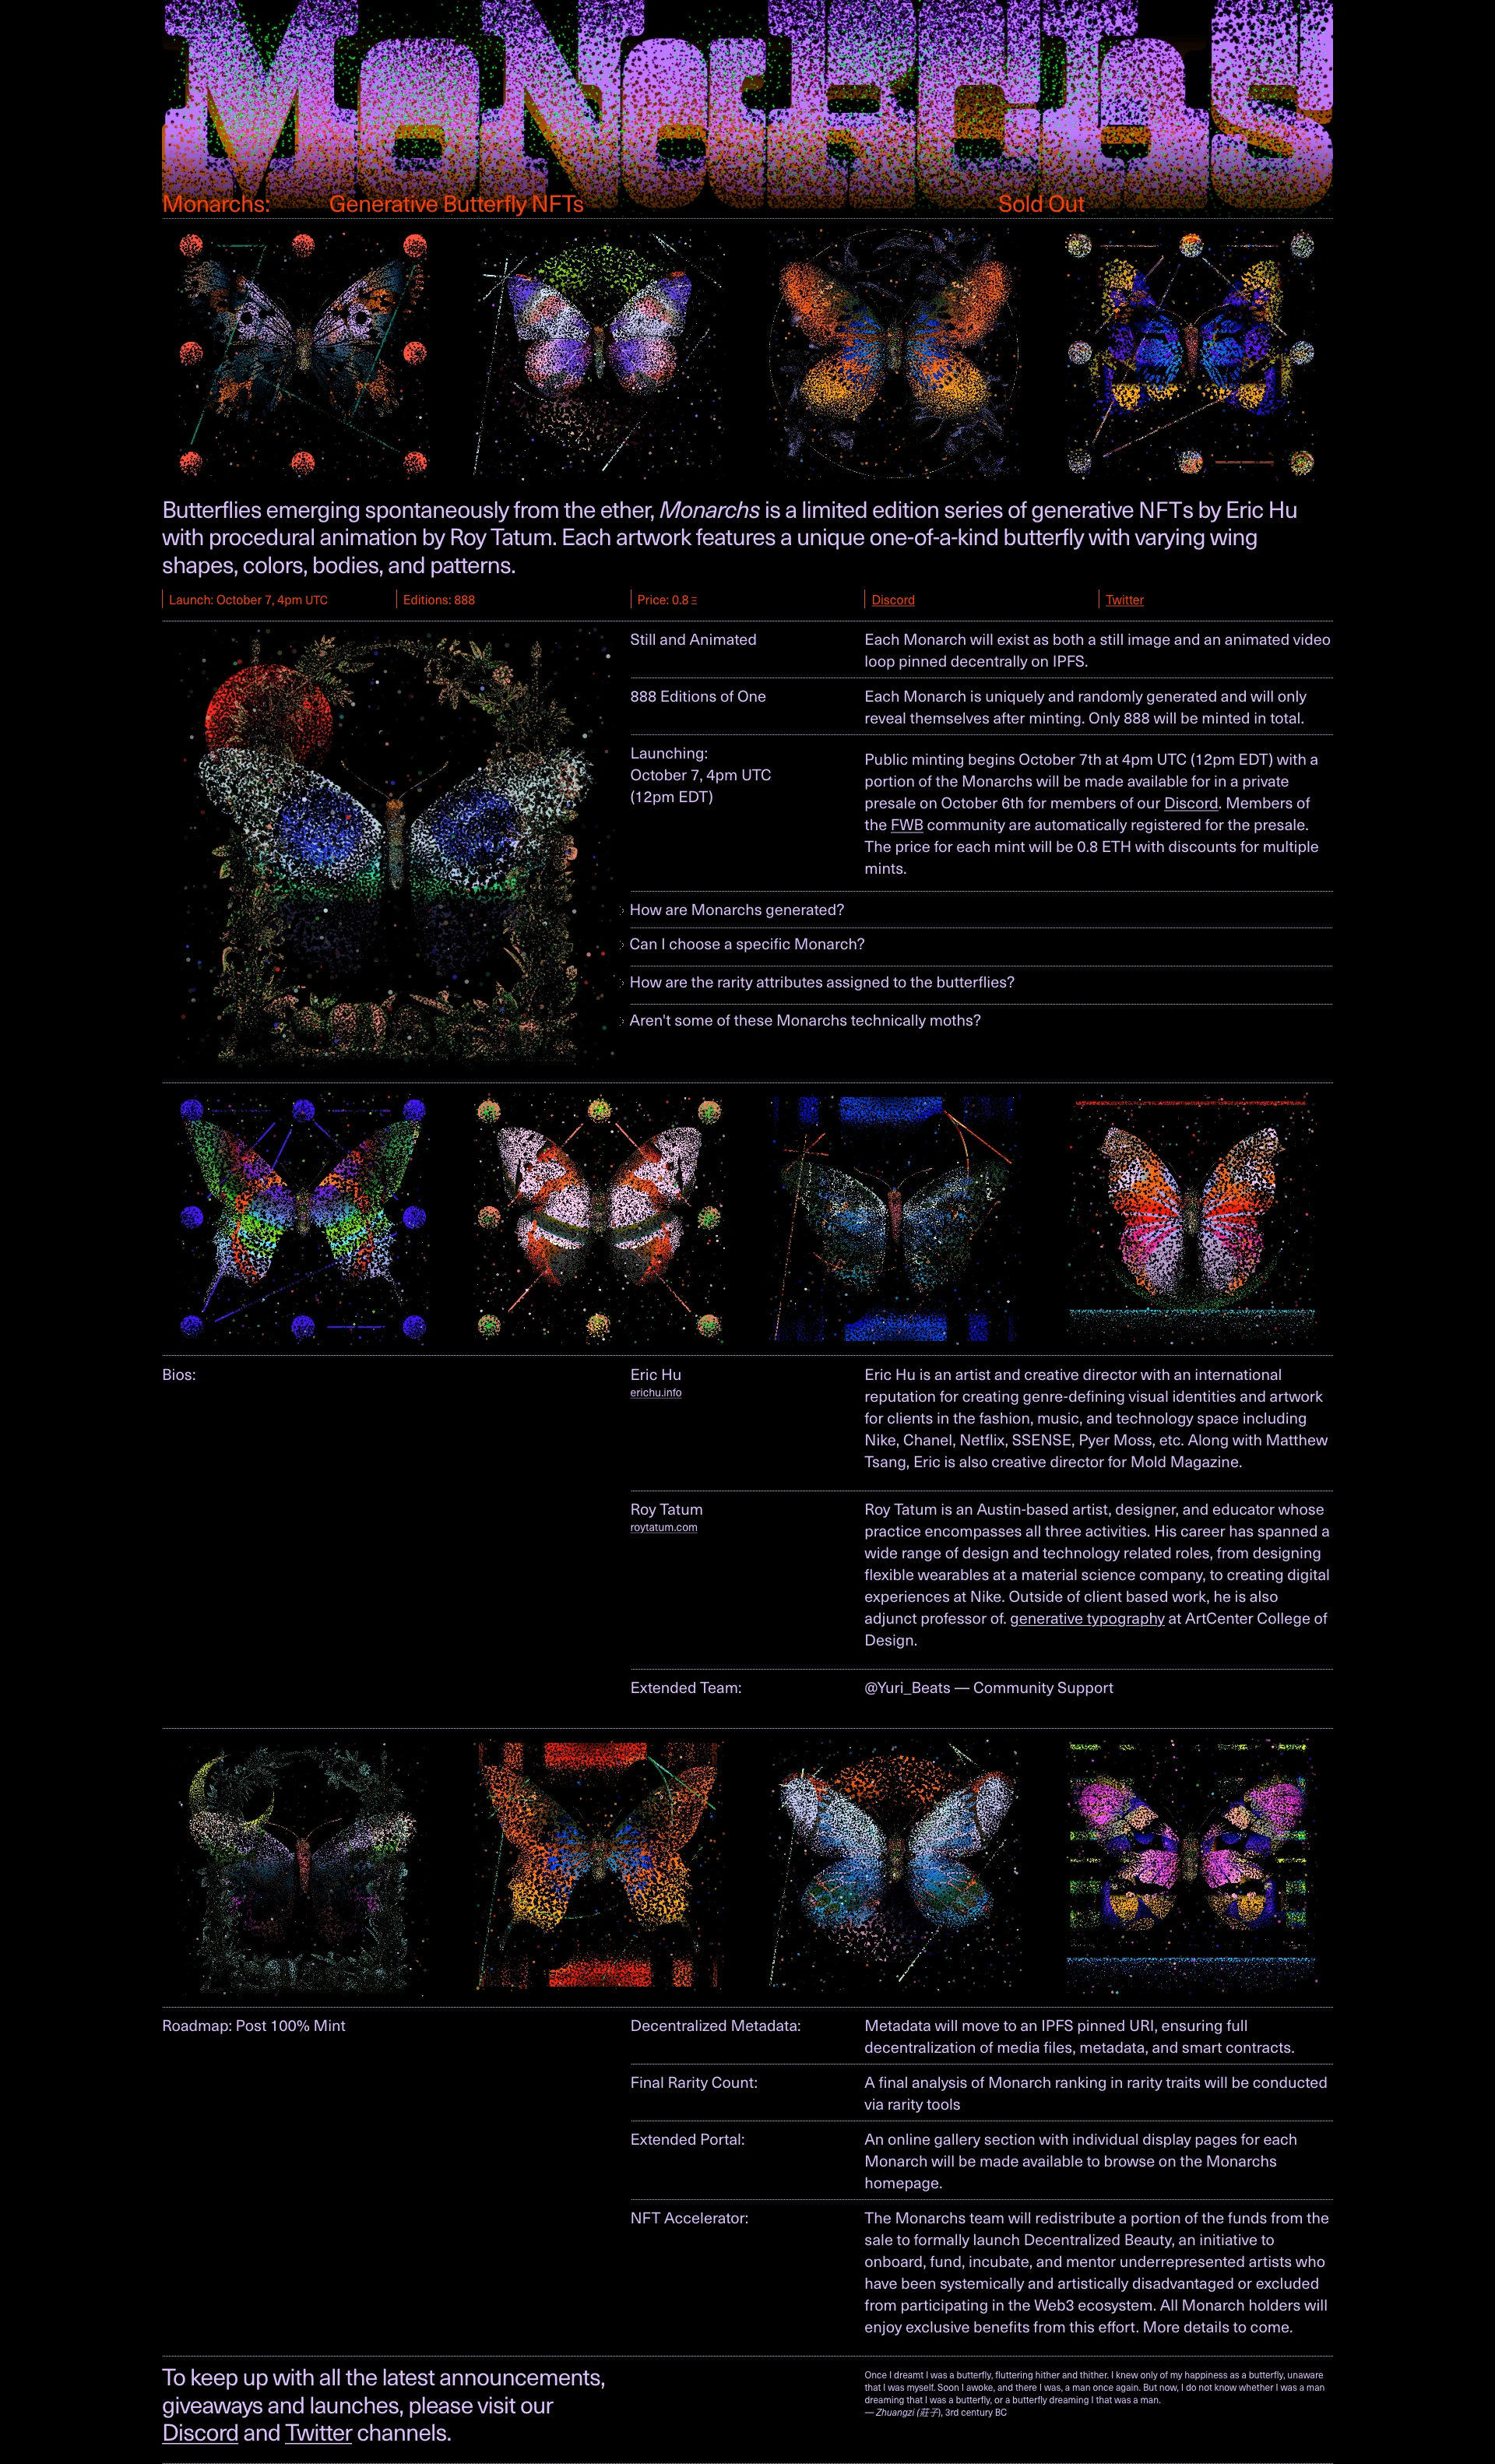 Monarchs Landing Page Example: Monarchs is a limited edition series of generative on-chain butterfly NFTs by Eric Hu. Each artwork features a unique one-of-a-kind butterfly with varying wing shapes, colors, bodies, and patterns—some traits much less common than others.